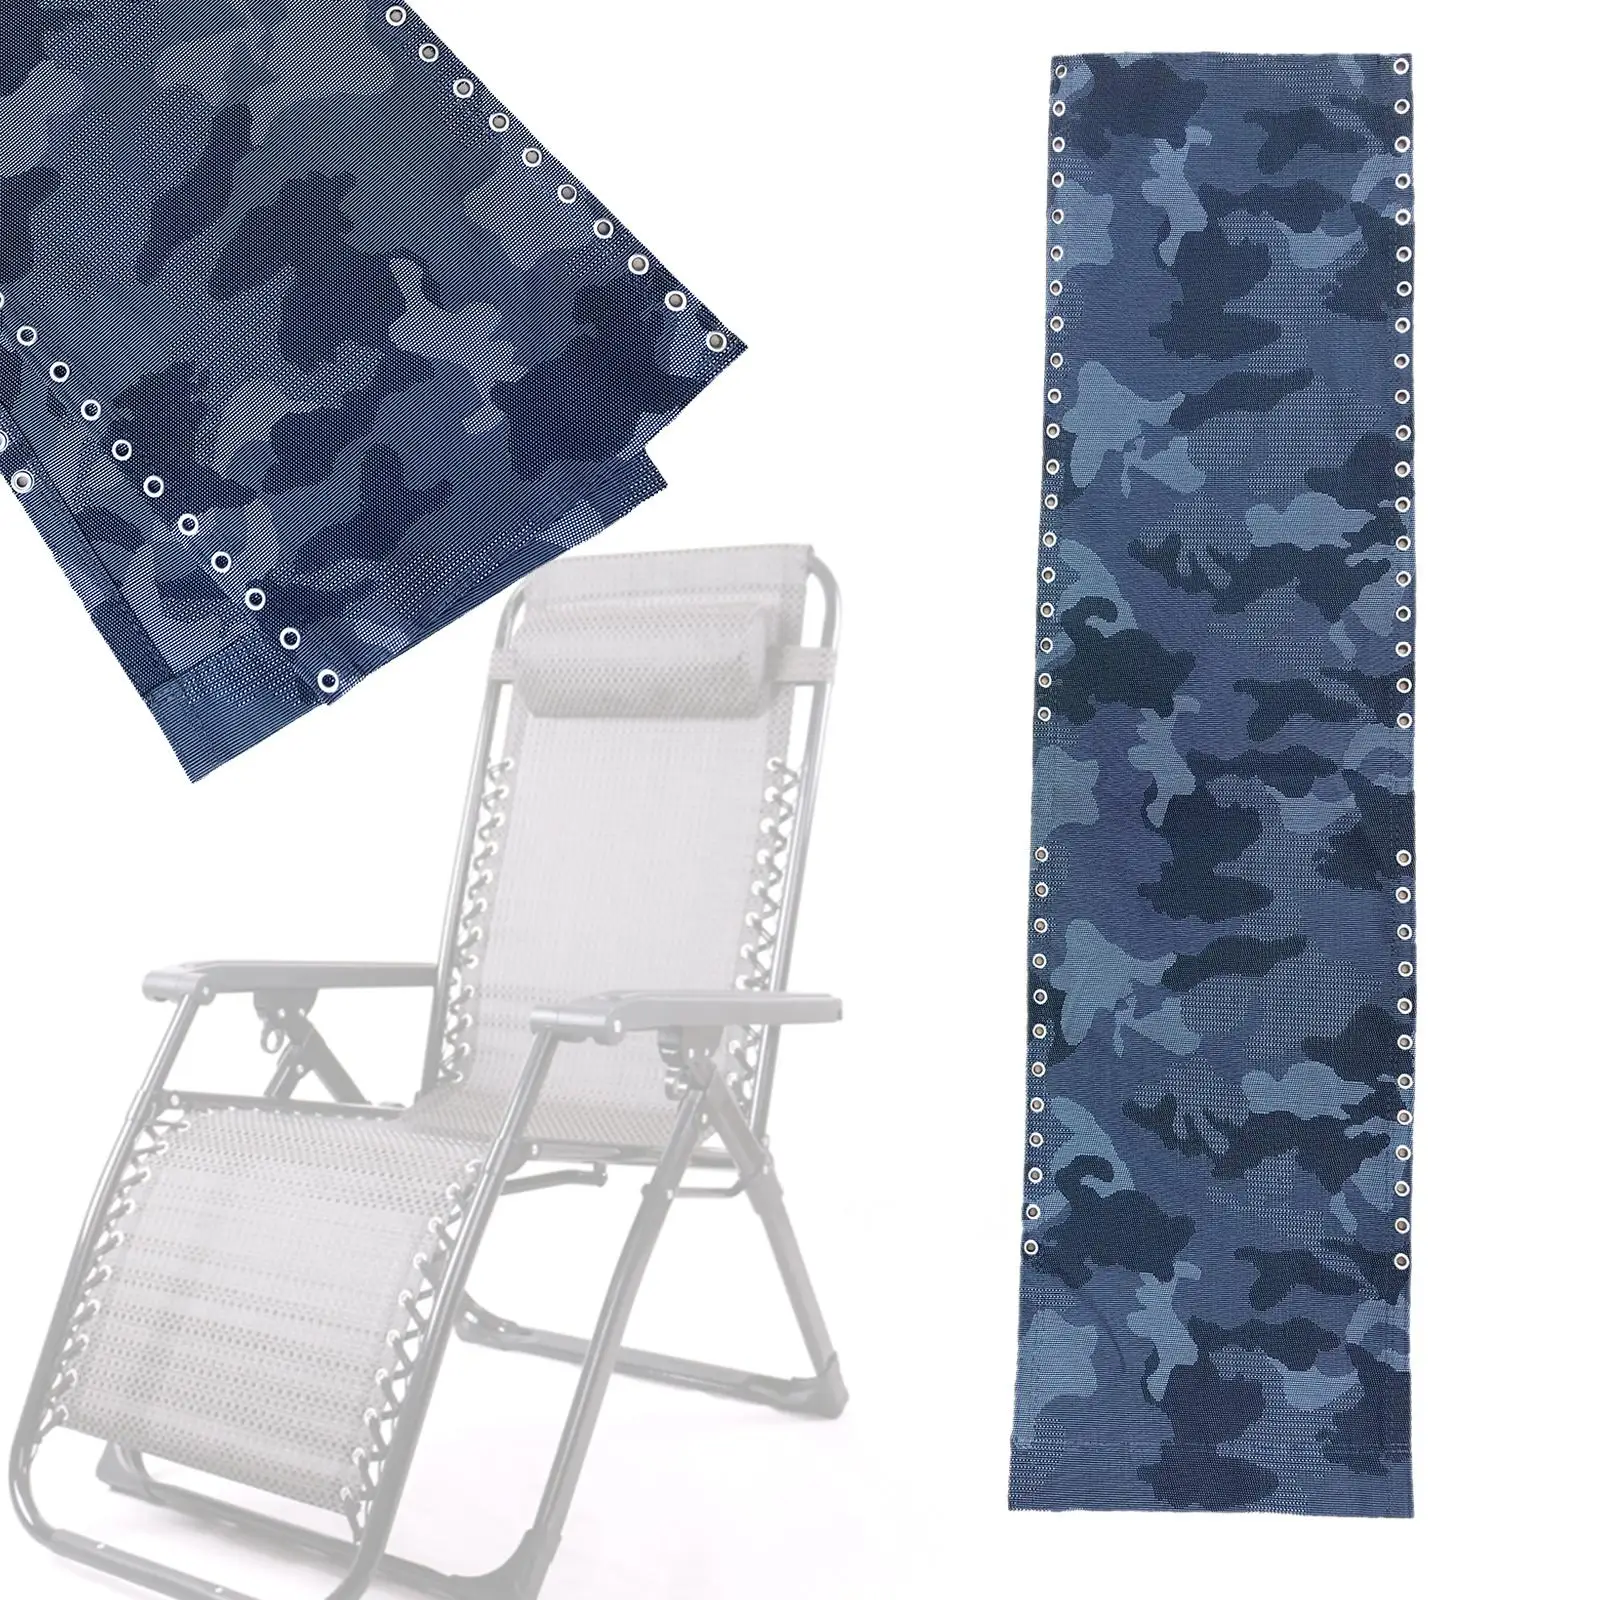 Breathable Recliner Chair Cloth Chair Accessories Recliner Lounge Chair Cloth for Patio Beach Outdoor Deck Chairs Folding Chair